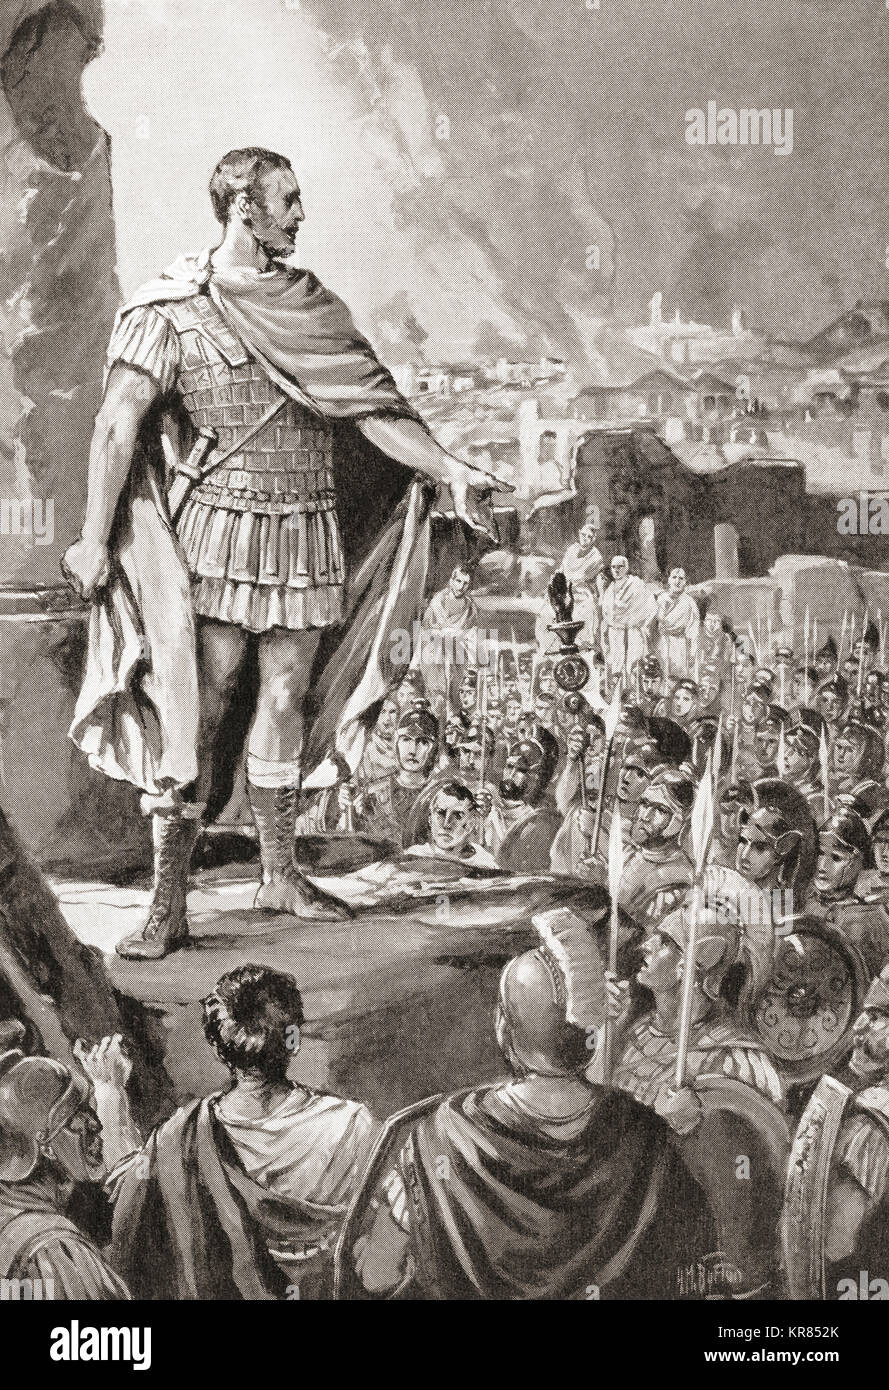 The first secessio plebis of 494 B.C. in ancient Rome. This was a dispute between the patrician ruling class and the plebeian underclass initially sparked by discontent about the burden of debt on the poorer plebeian class.  From Hutchinson's History of the Nations, published 1915. Stock Photo